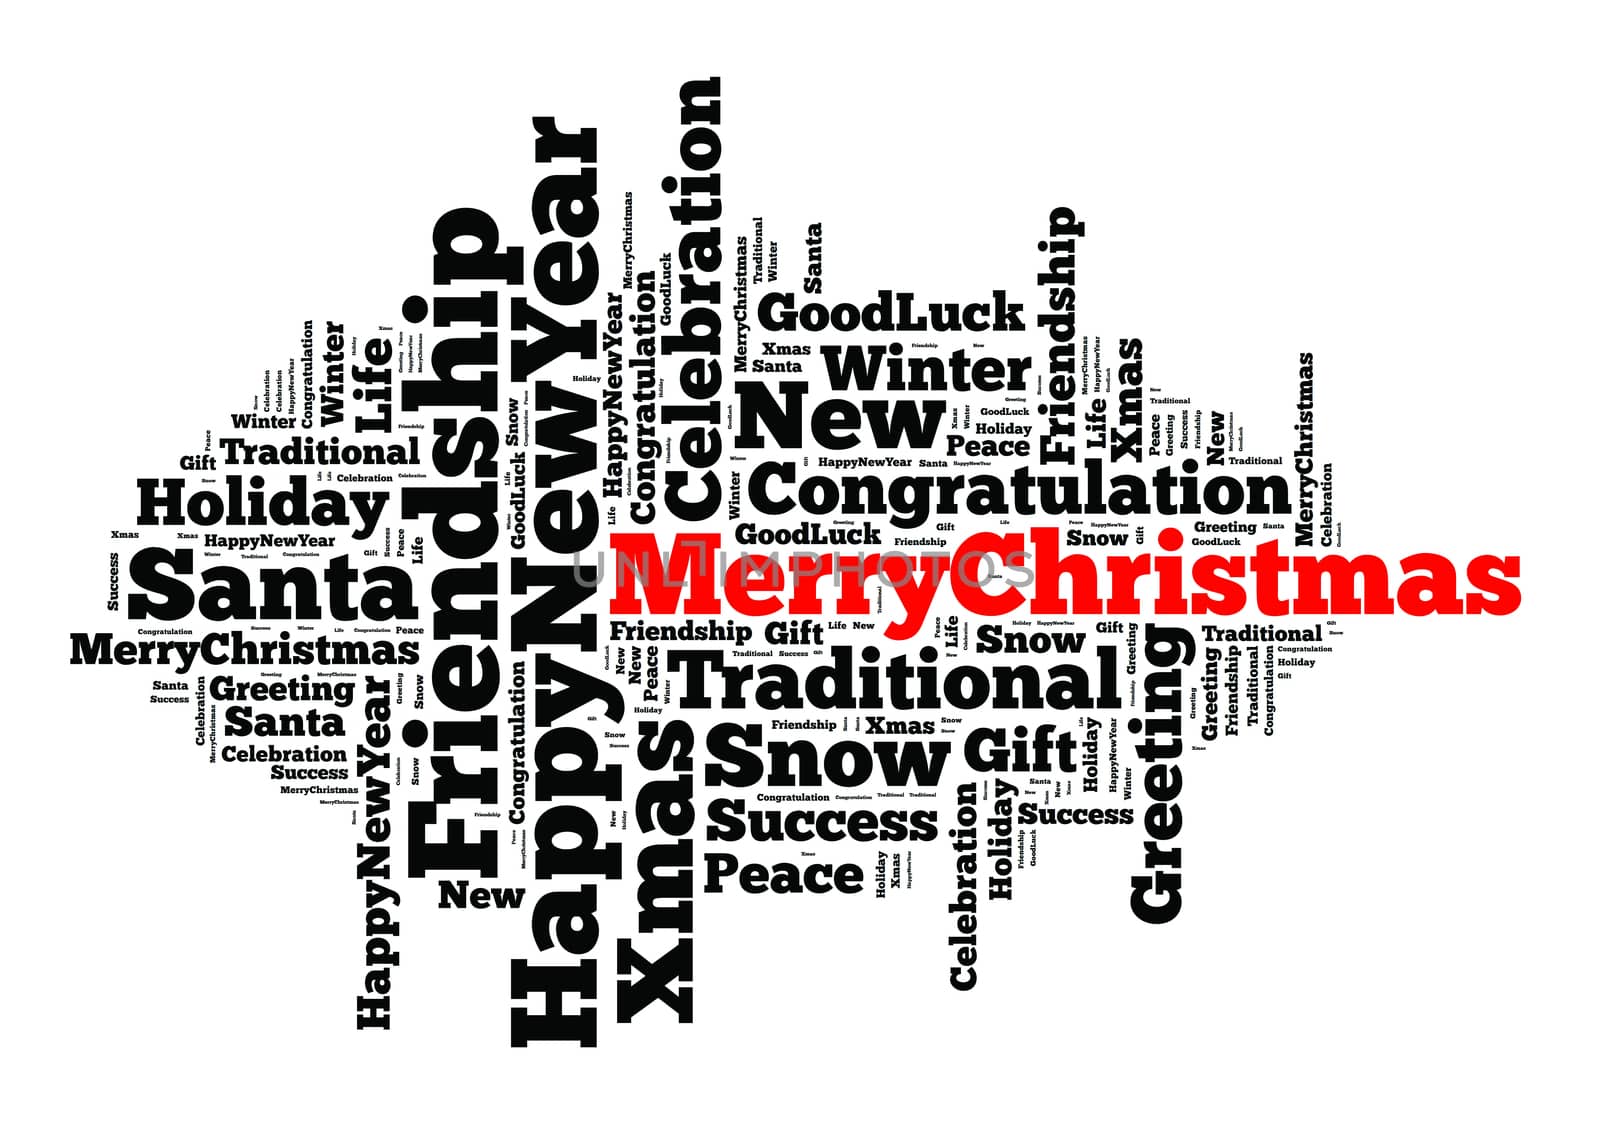 Merry Christmas word cloud concept by eenevski